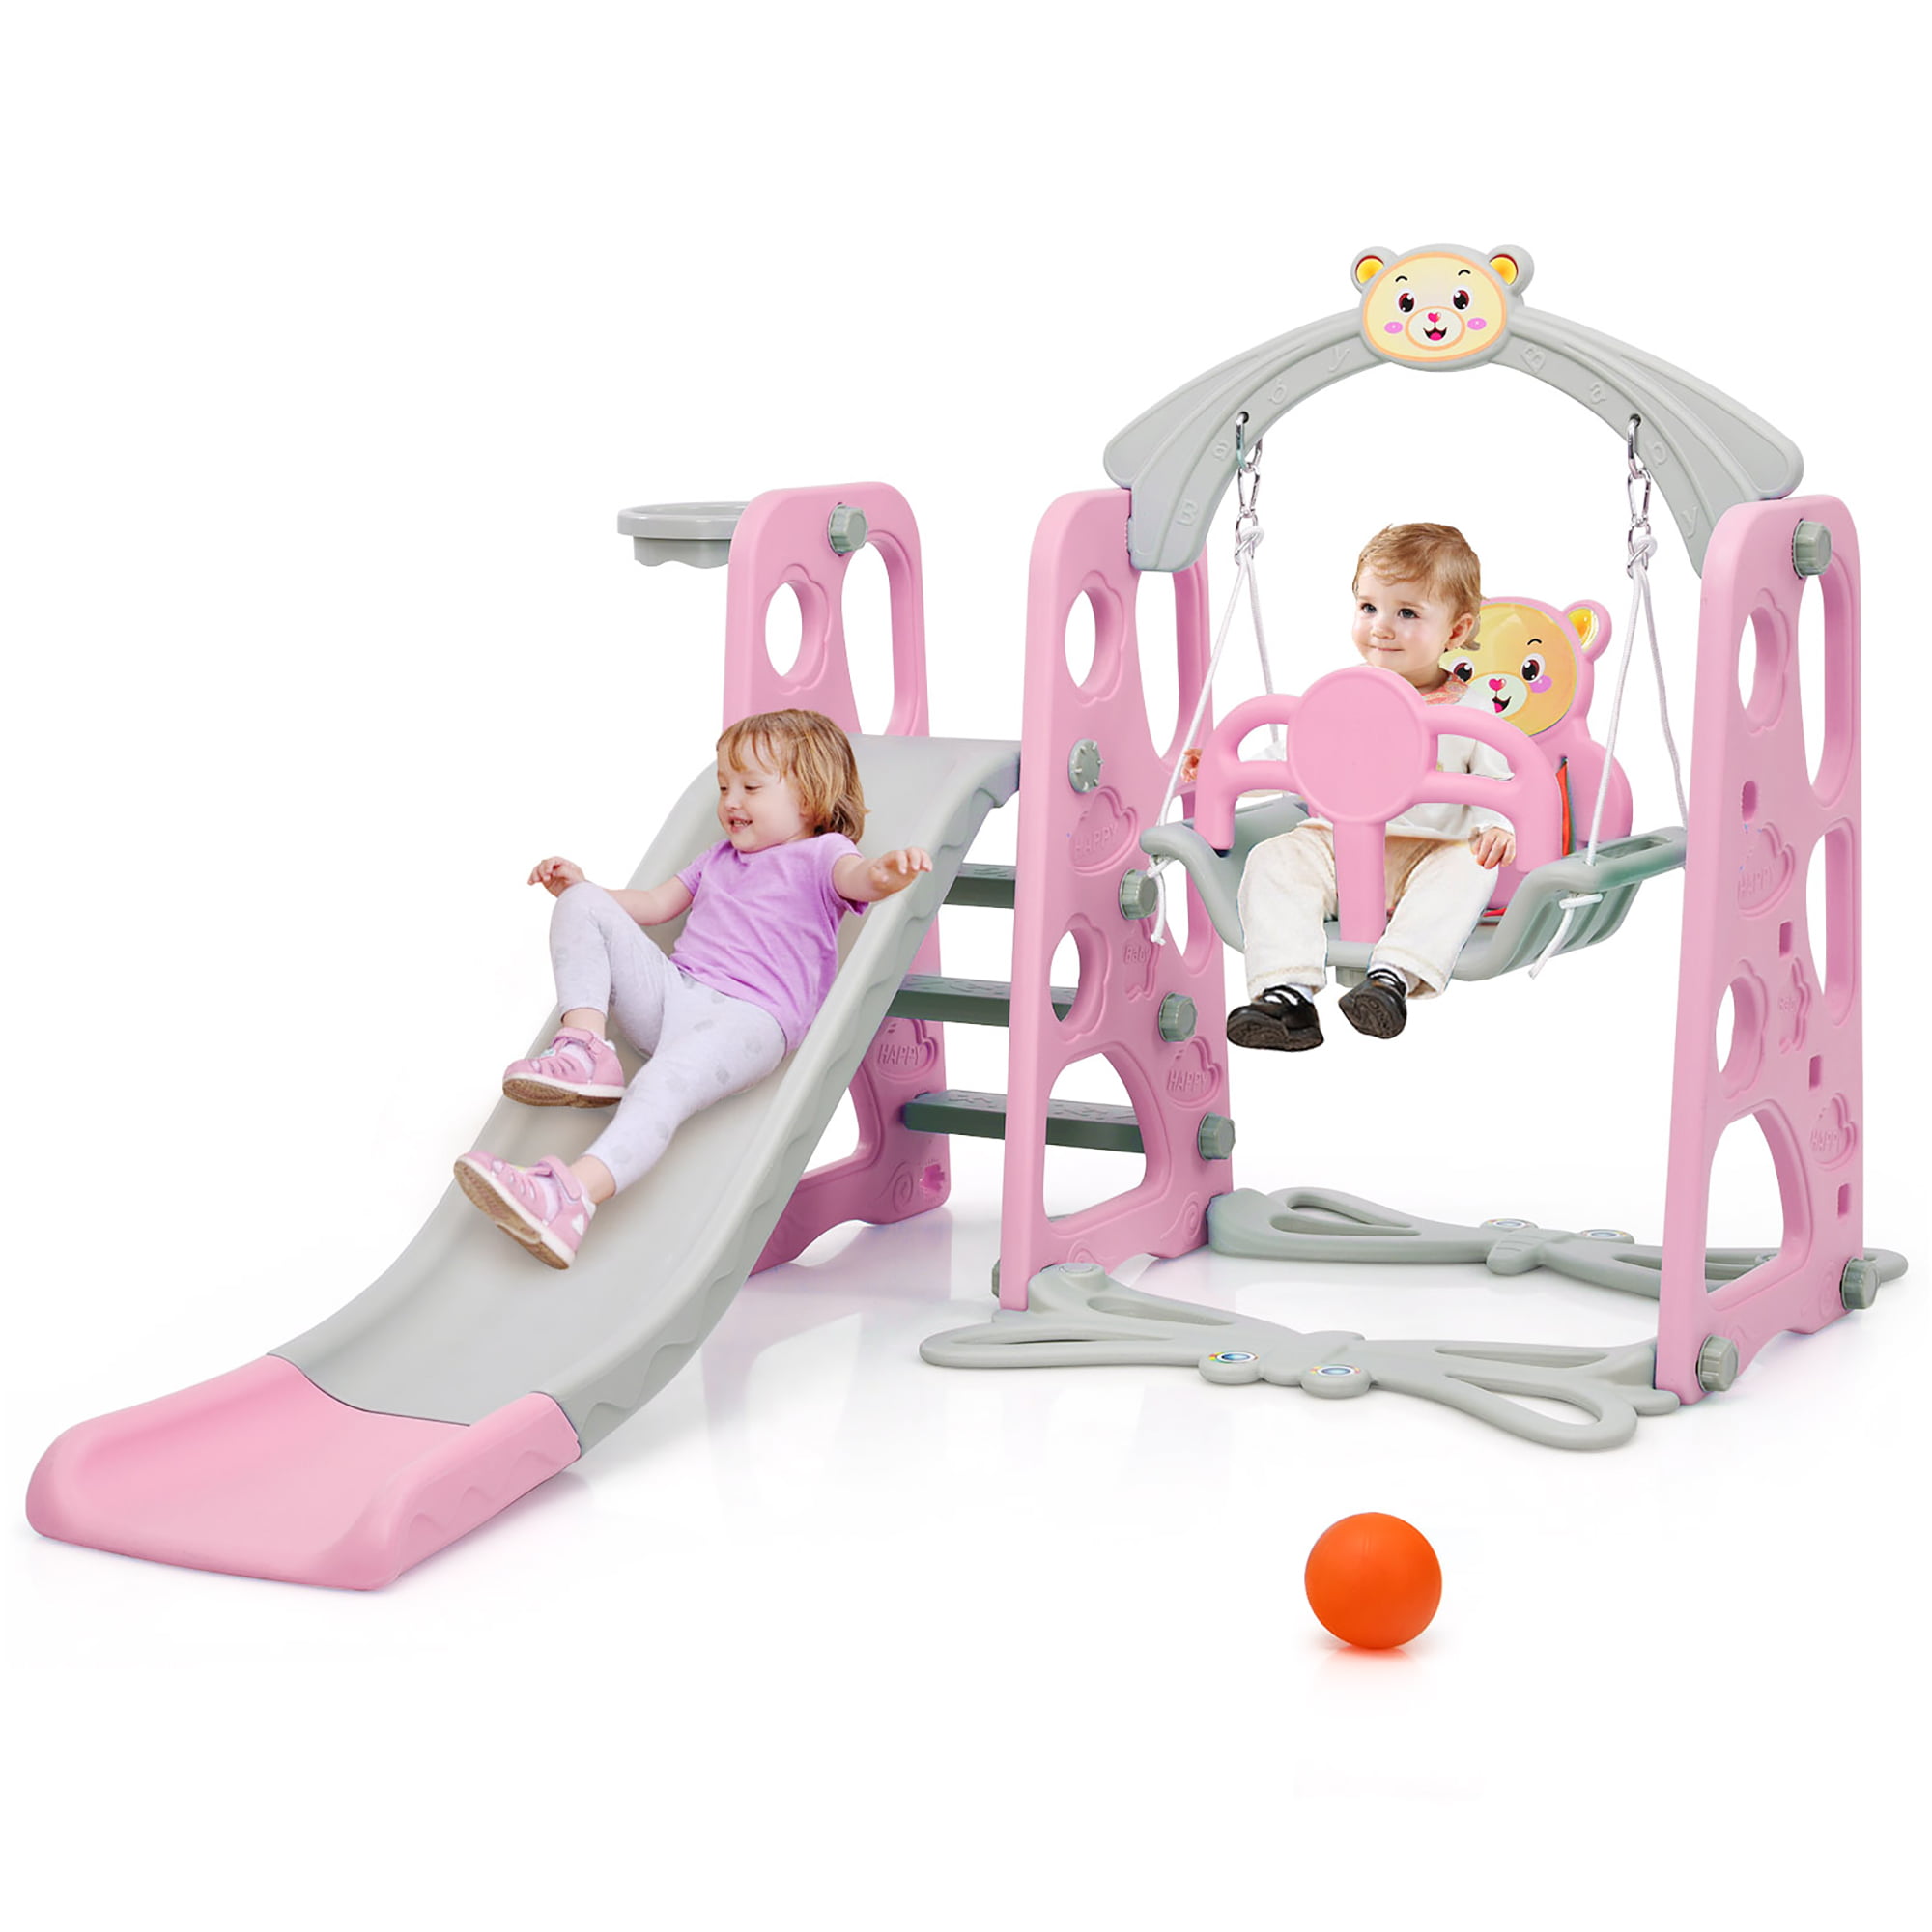 Details about   Toddler Climber And Swing Set,4 in 1 Climber Sliding Playset w/Basketball Hoop A 